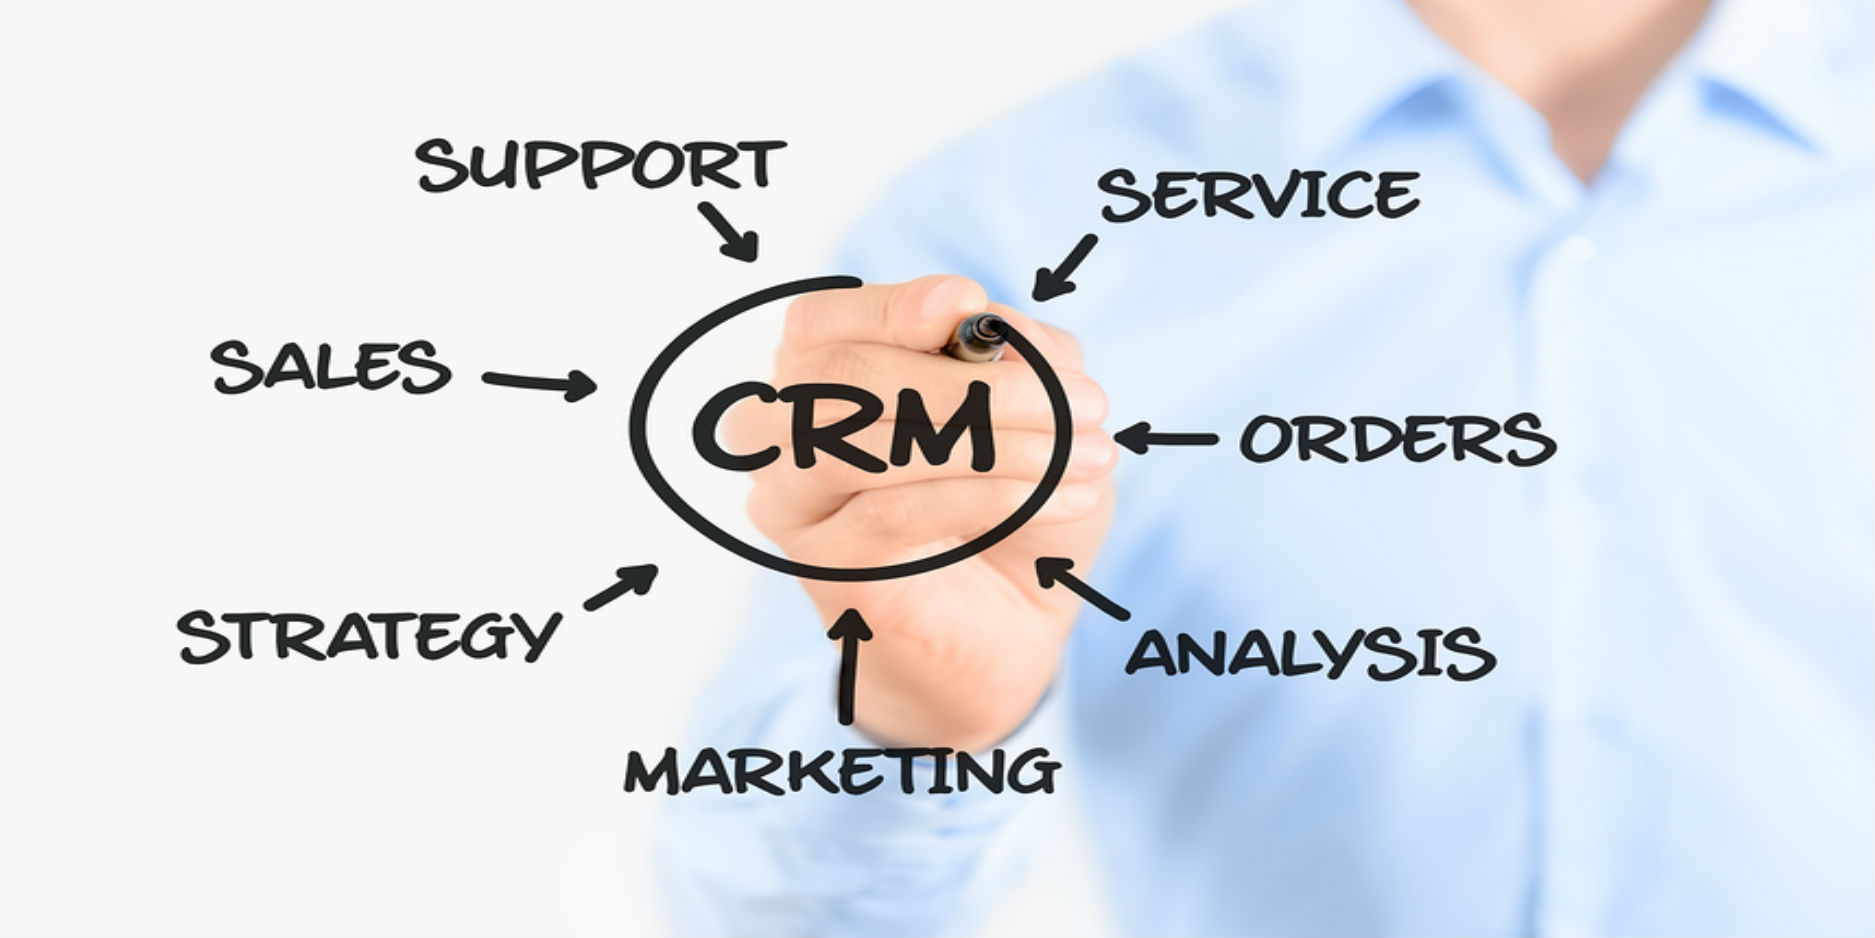 crm - CRM System; crm tools